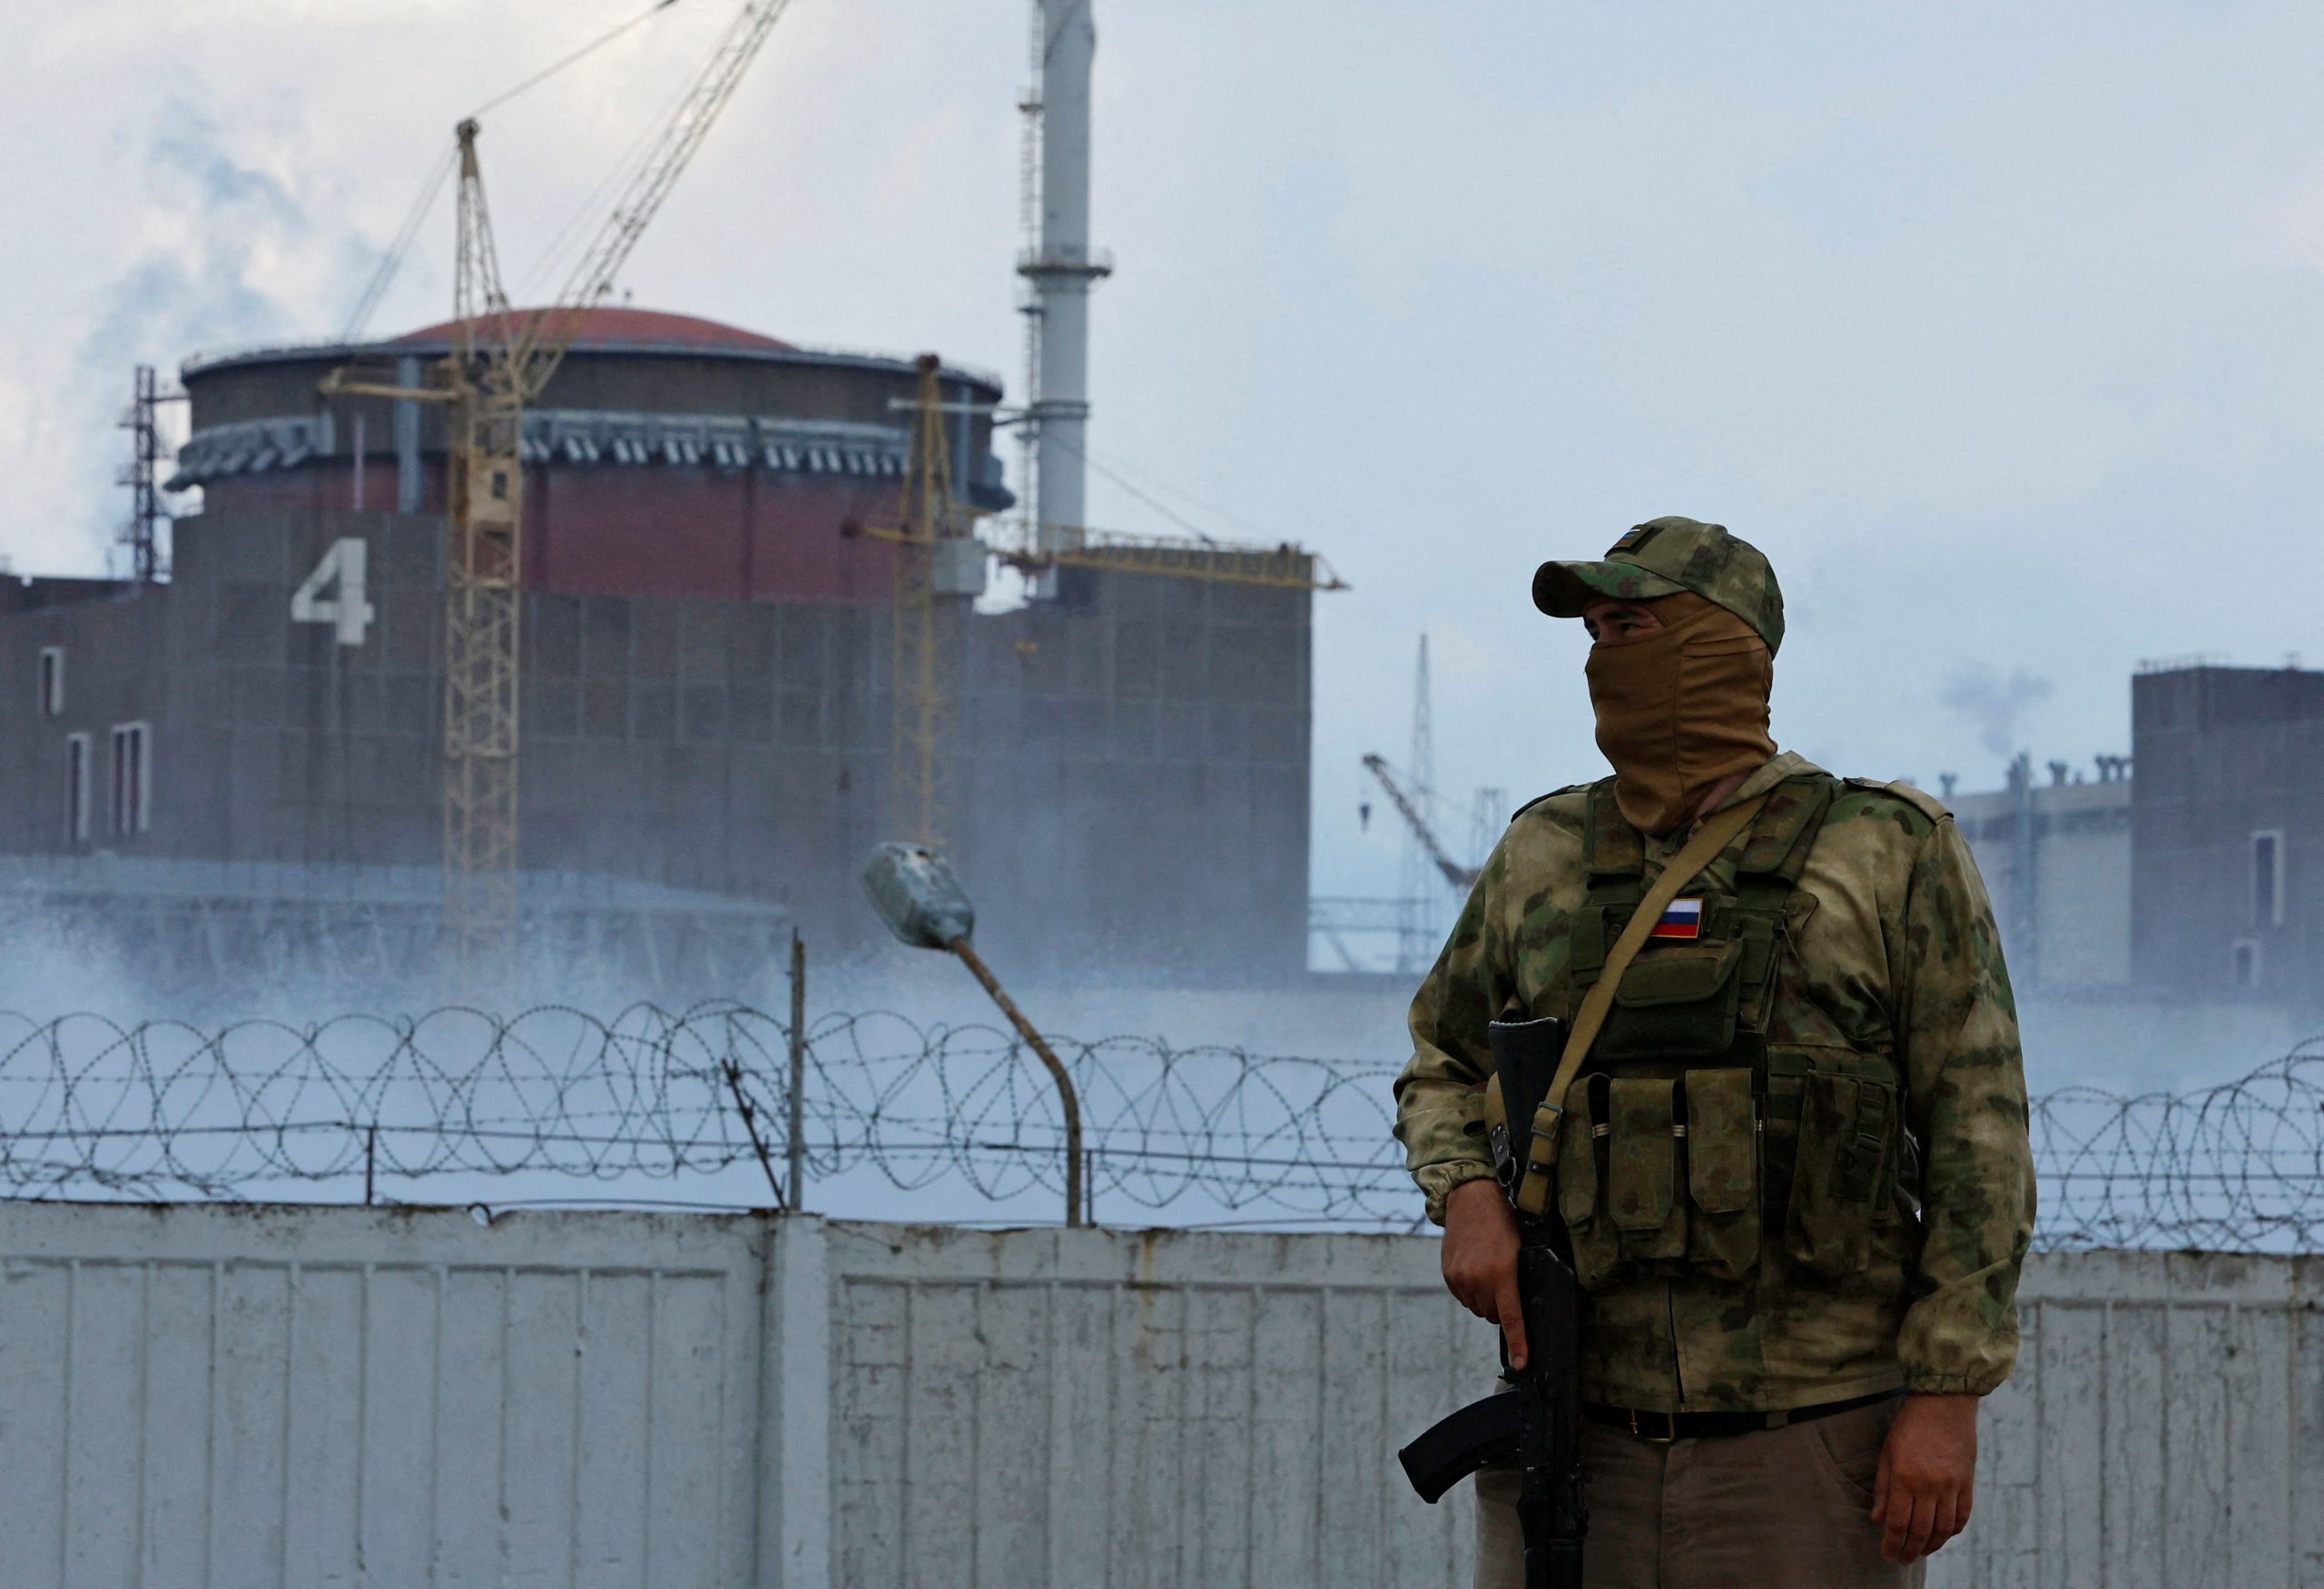 Photo: A serviceman with a Russian flag on his uniform stands guard near the Zaporizhzhia Nuclear Power Plant in the course of Ukraine-Russia conflict outside the Russian-controlled city of Enerhodar in the Zaporizhzhia region, Ukraine August 4, 2022. Credit: REUTERS/Alexander Ermochenko